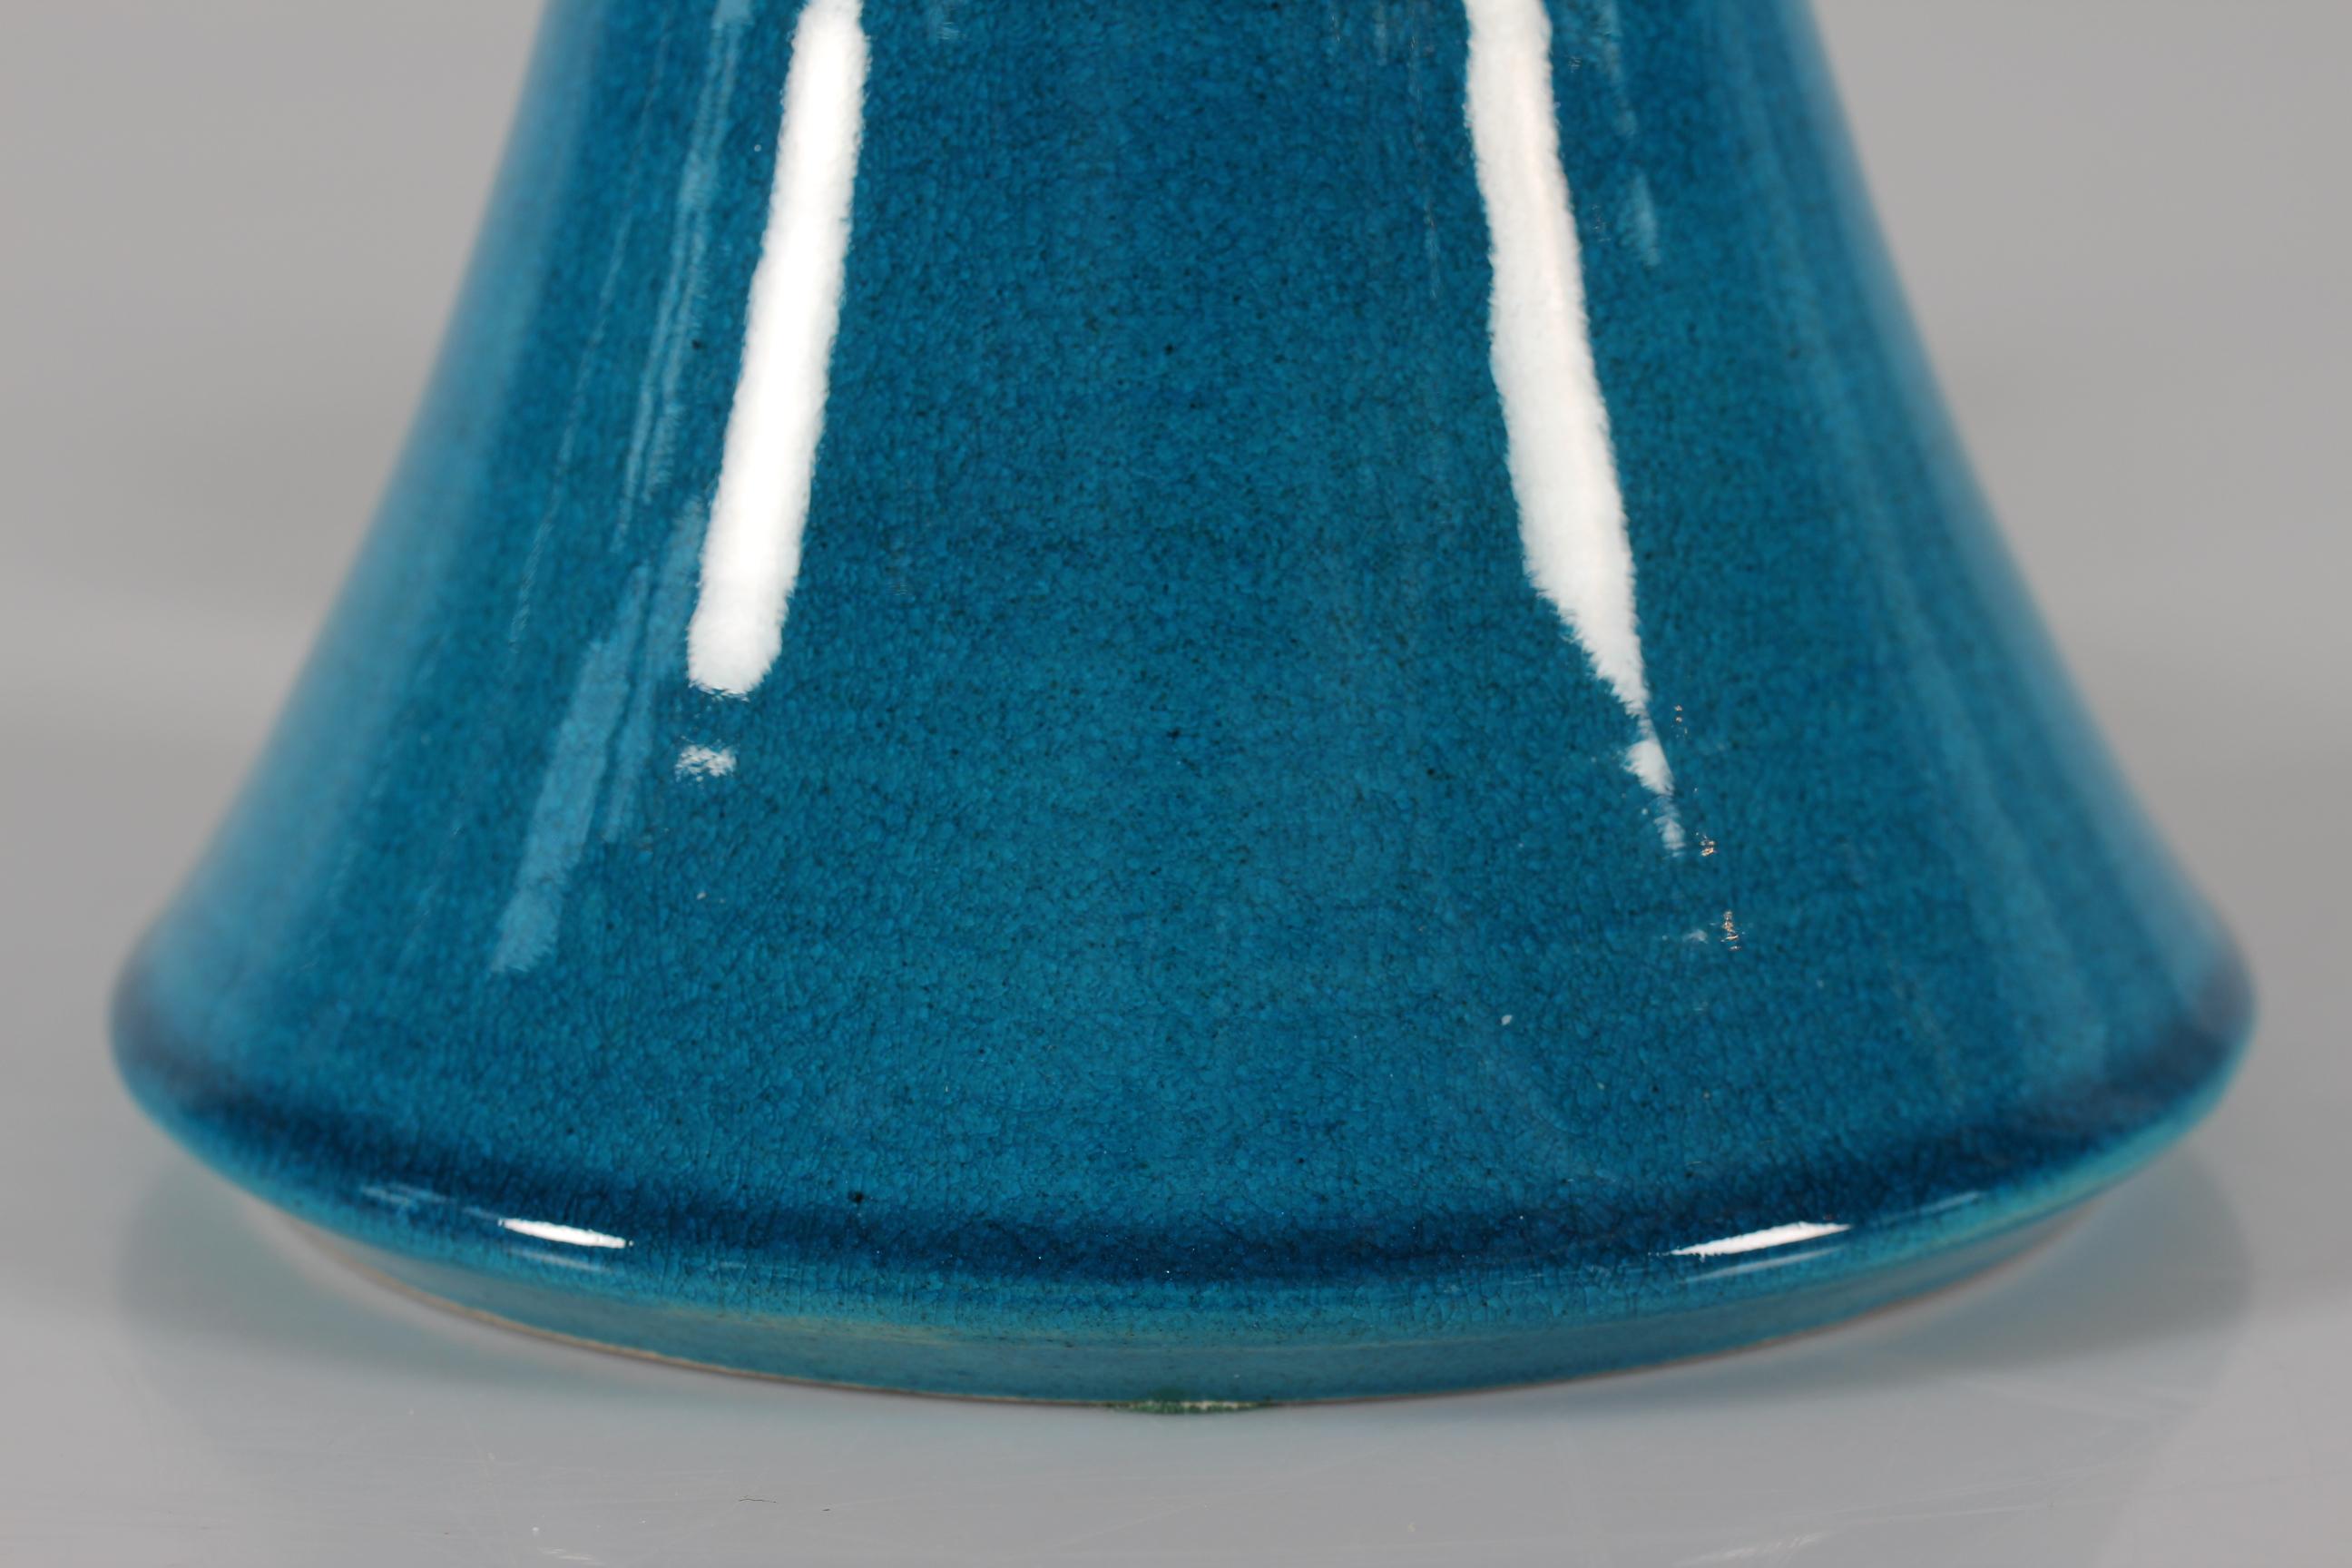 Tall mid-century Danish table lamp made at the ceramic workshop Kähler (HAK).
The lamp is created of stoneware and has a shiny turquoise blue glaze.
The design is most likely by Poul Erik Eliasen. Made circa 1960s.

Hand signed 